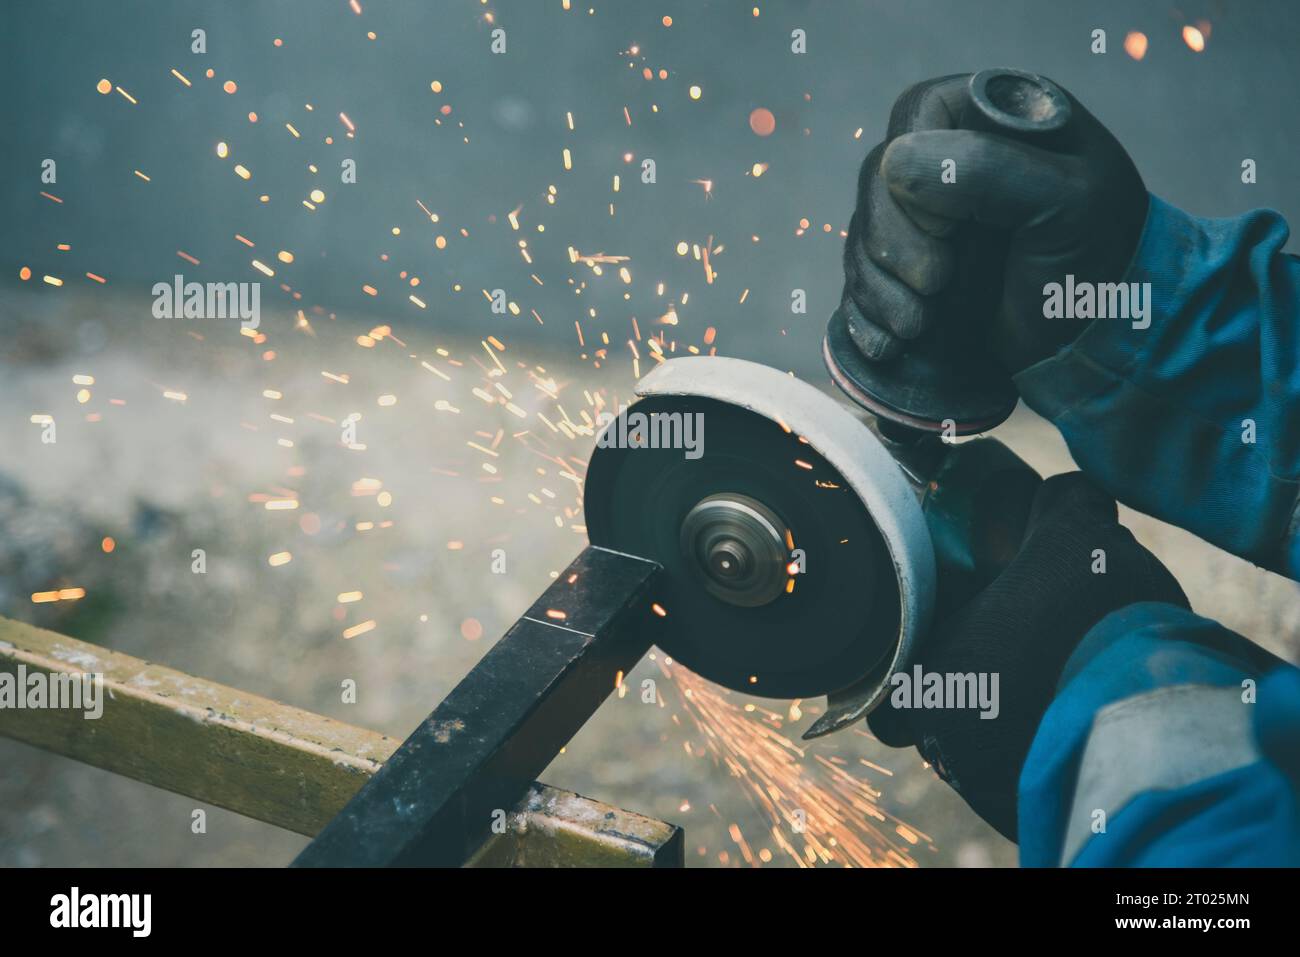 Man wearing safety gloves is cutting a metal with hand grinder machine. Lots of sparks. Stock Photo